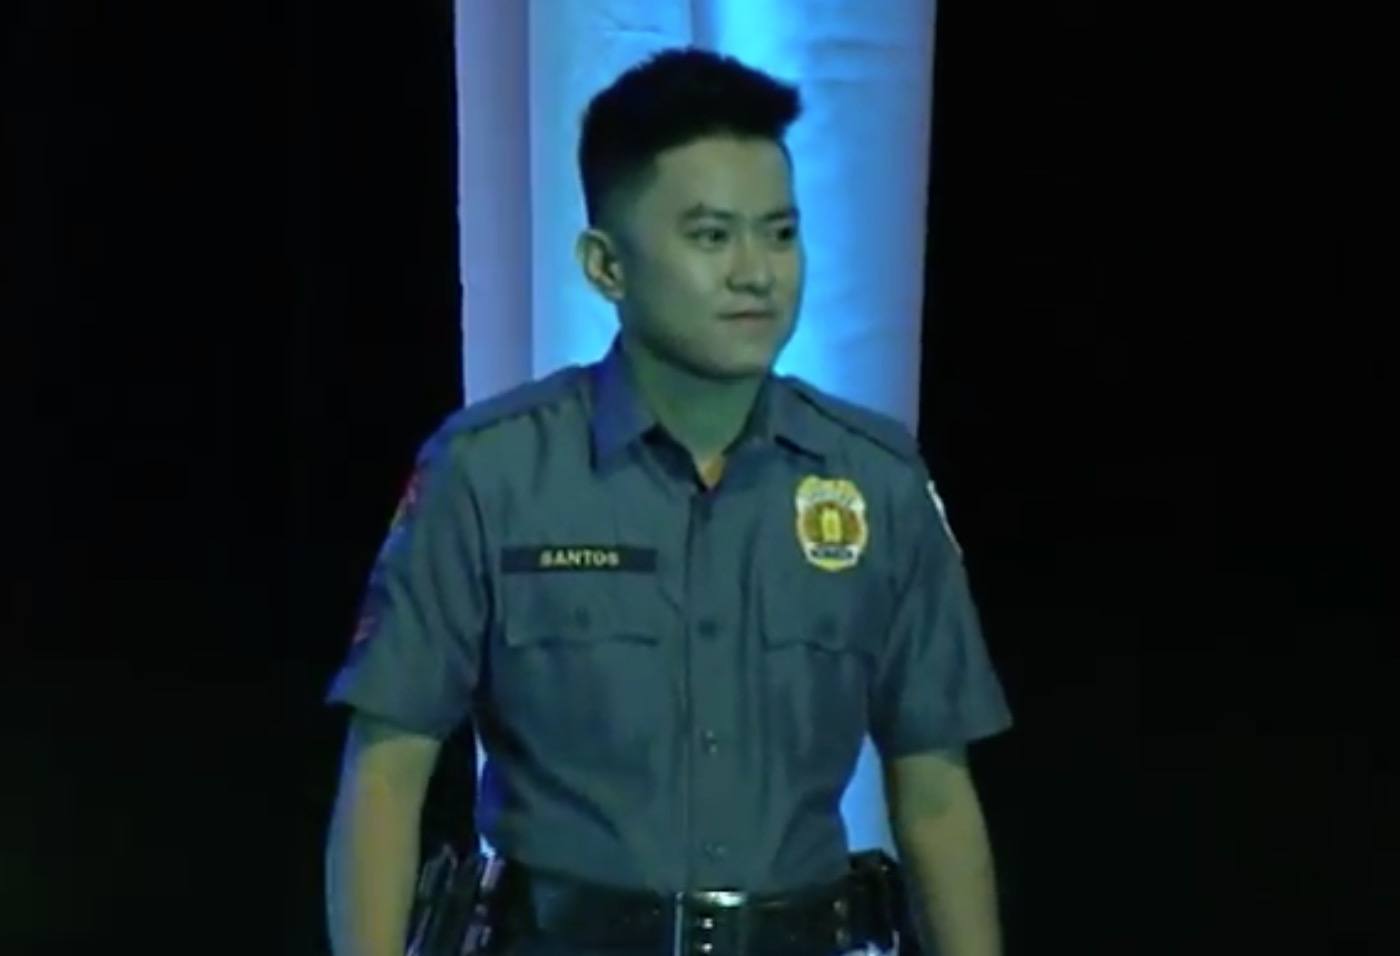 PO1 Clarissa Santos is the first ever winner of ‘Gwapulis’ pageant. PHOTO: Screengrab from ABS-CBN footage